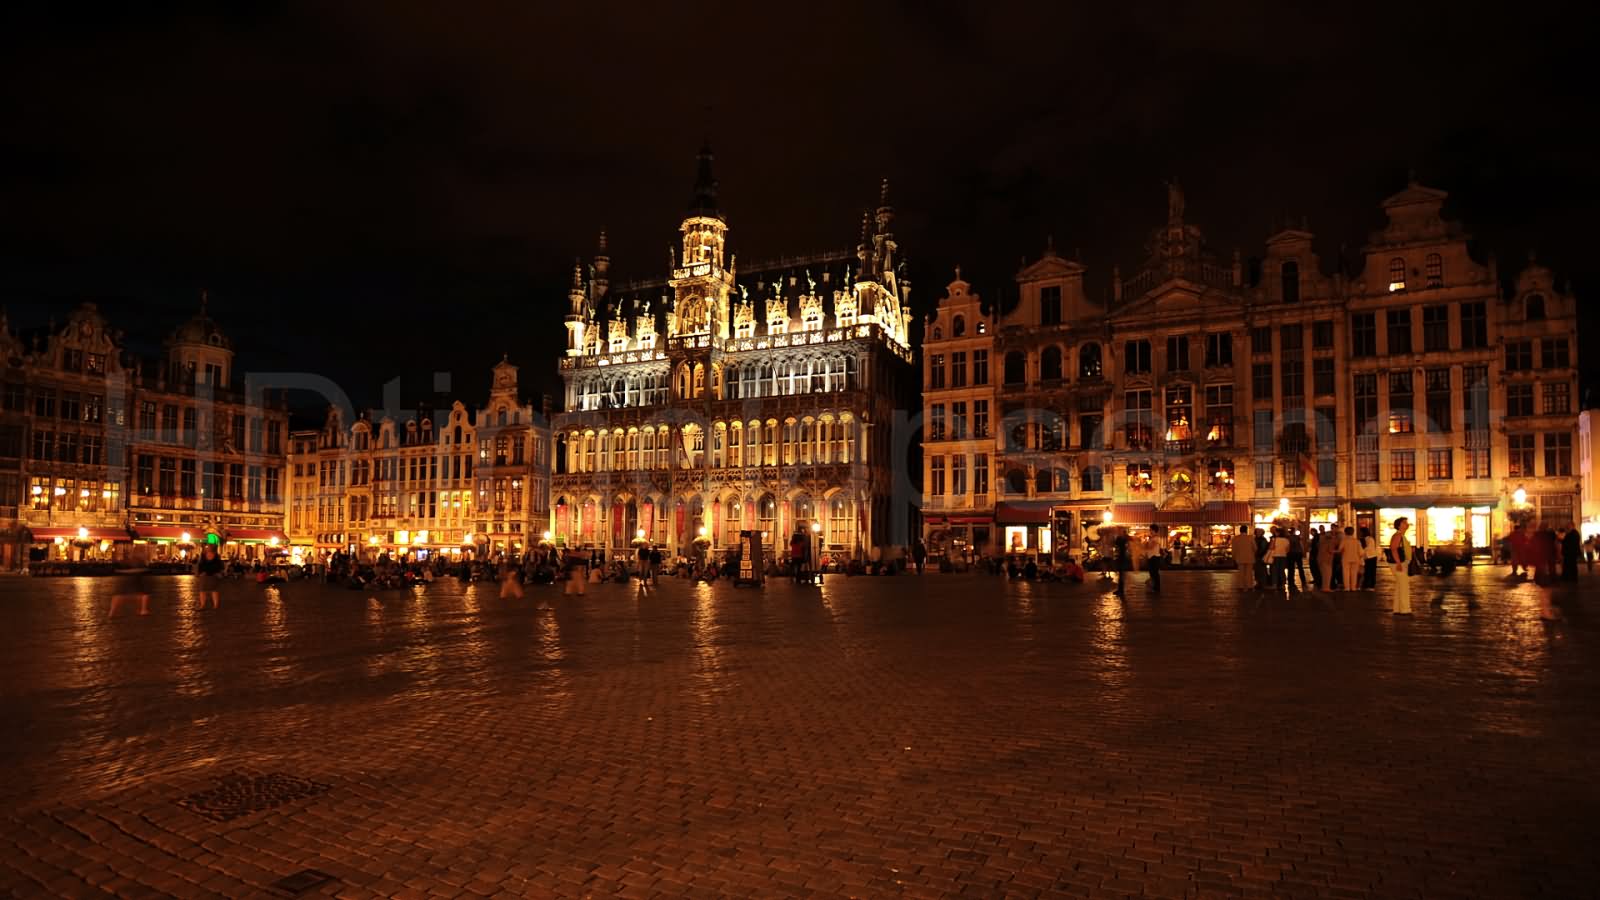 Night Photo Of The Grand Place In Brussels